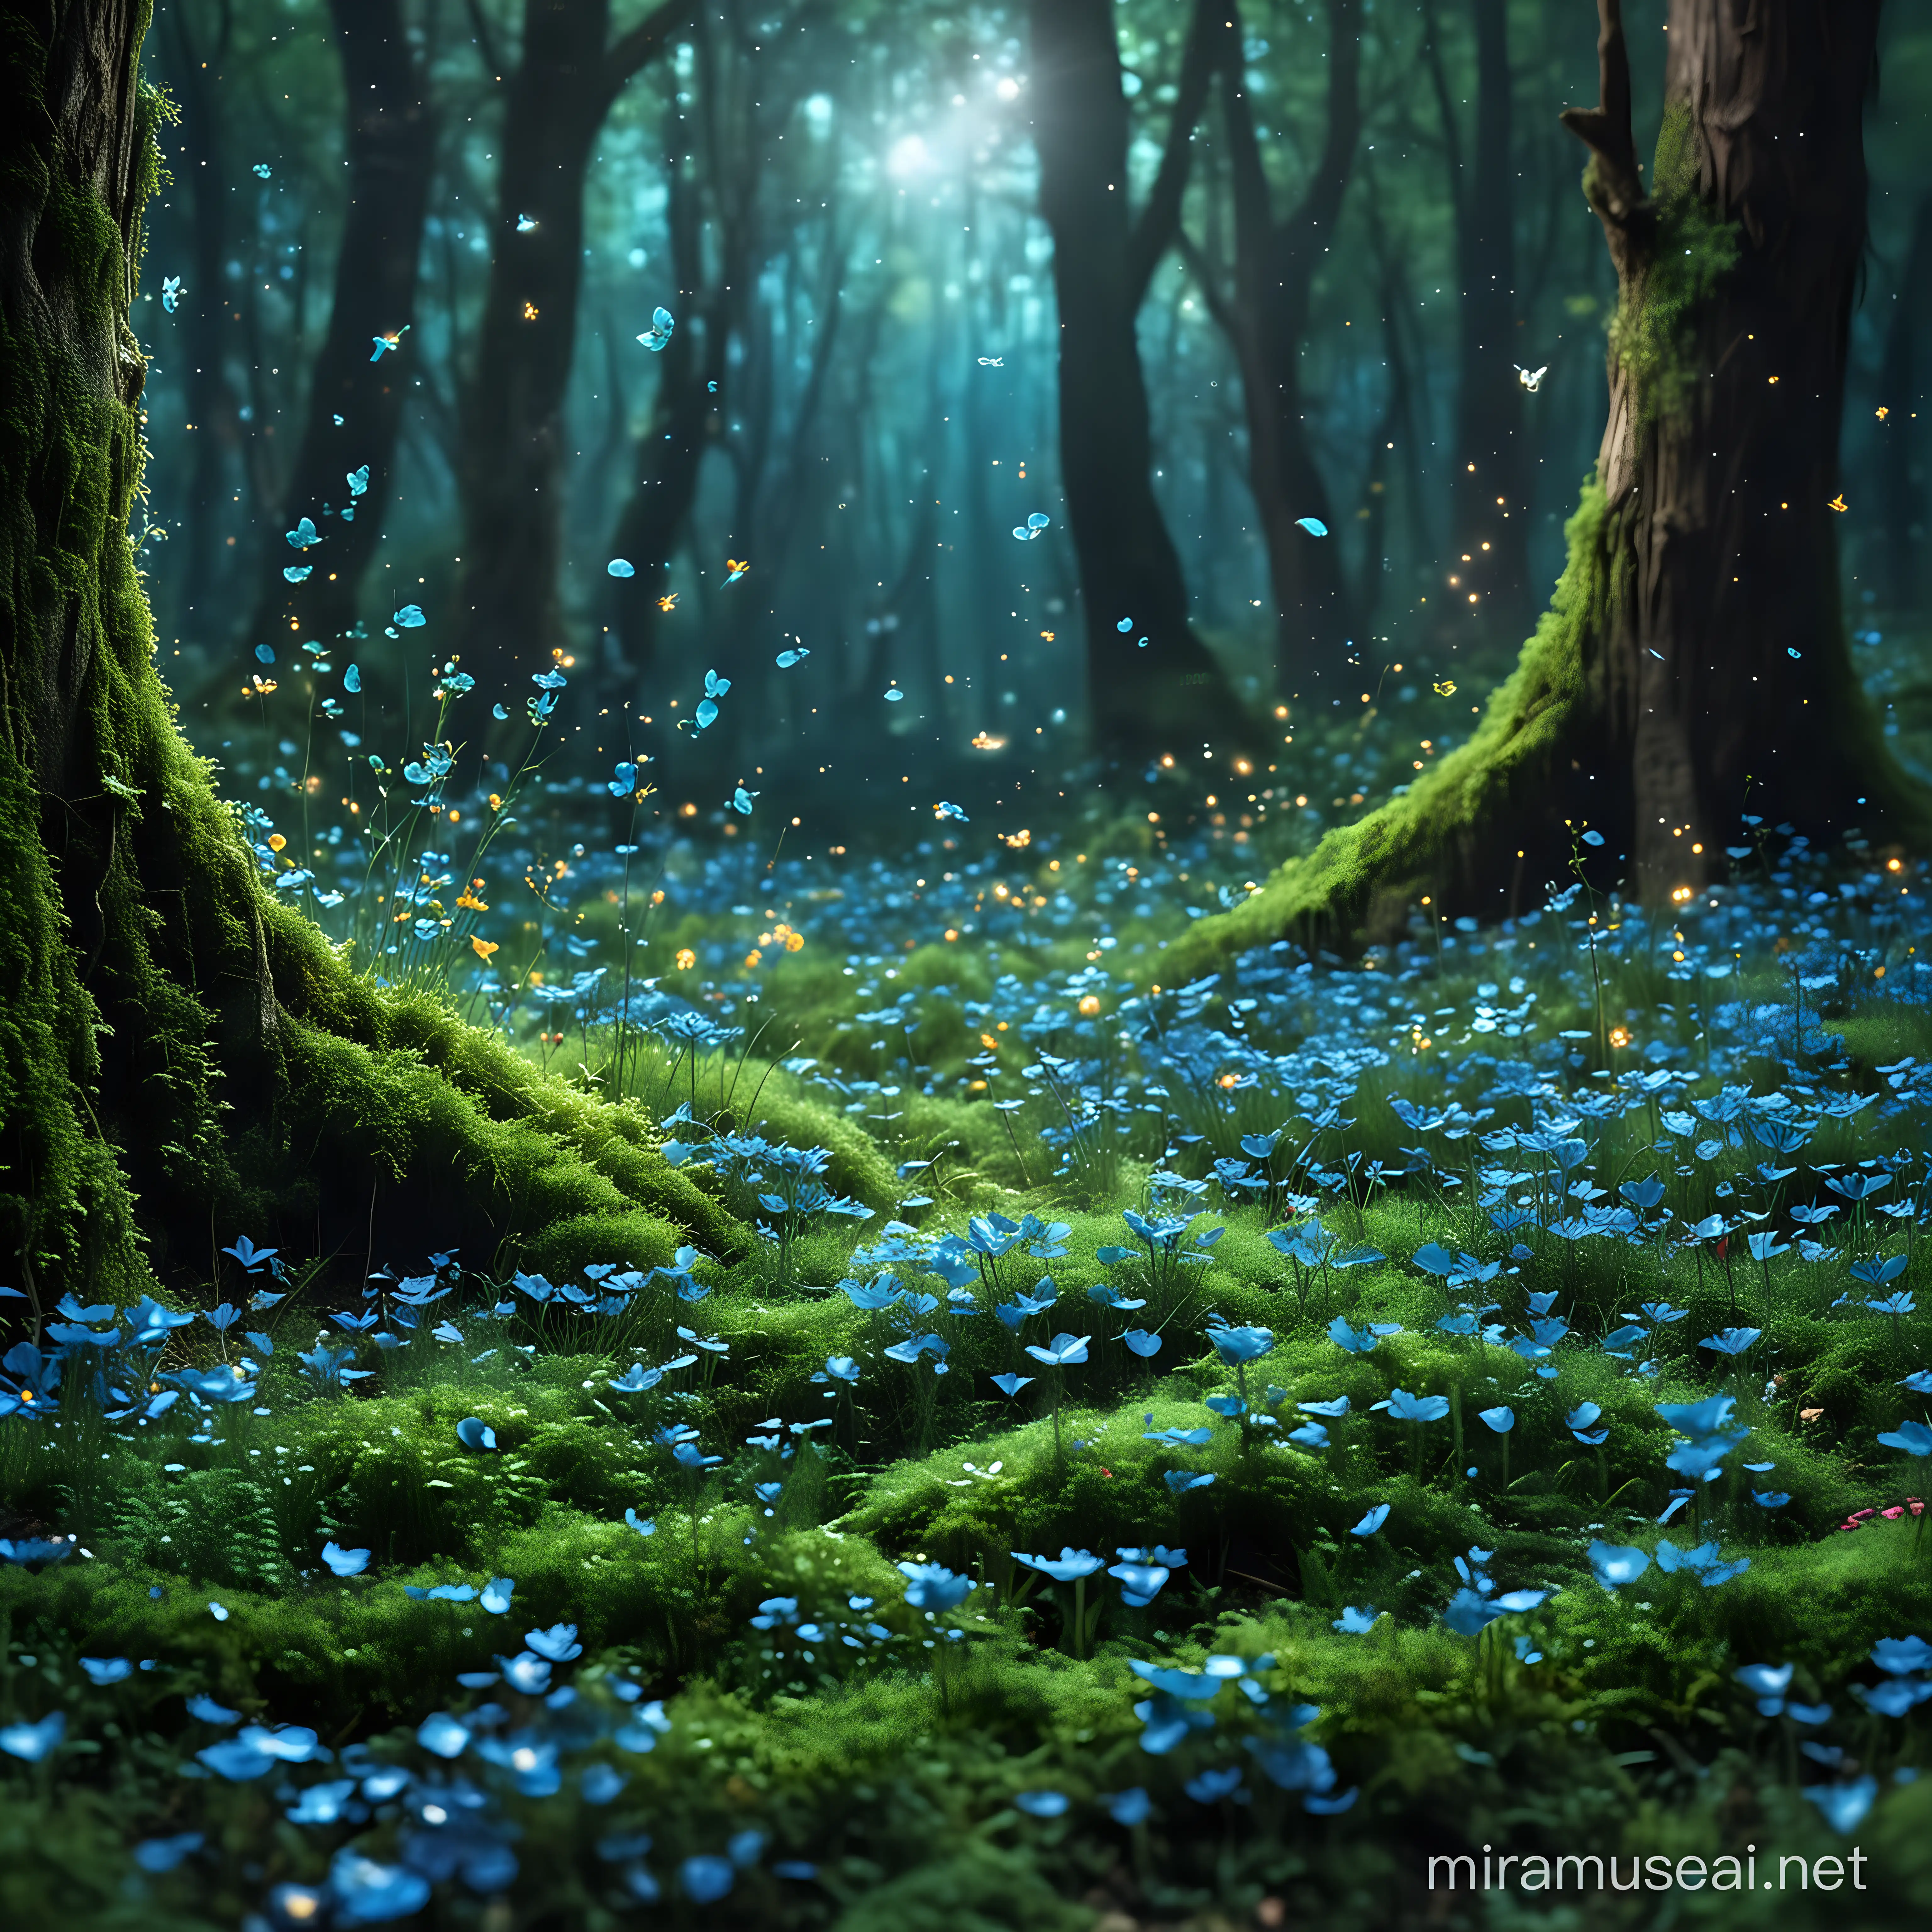 Whimsical Enchanted Forest with Vibrant Flowers and Glowing Fairies